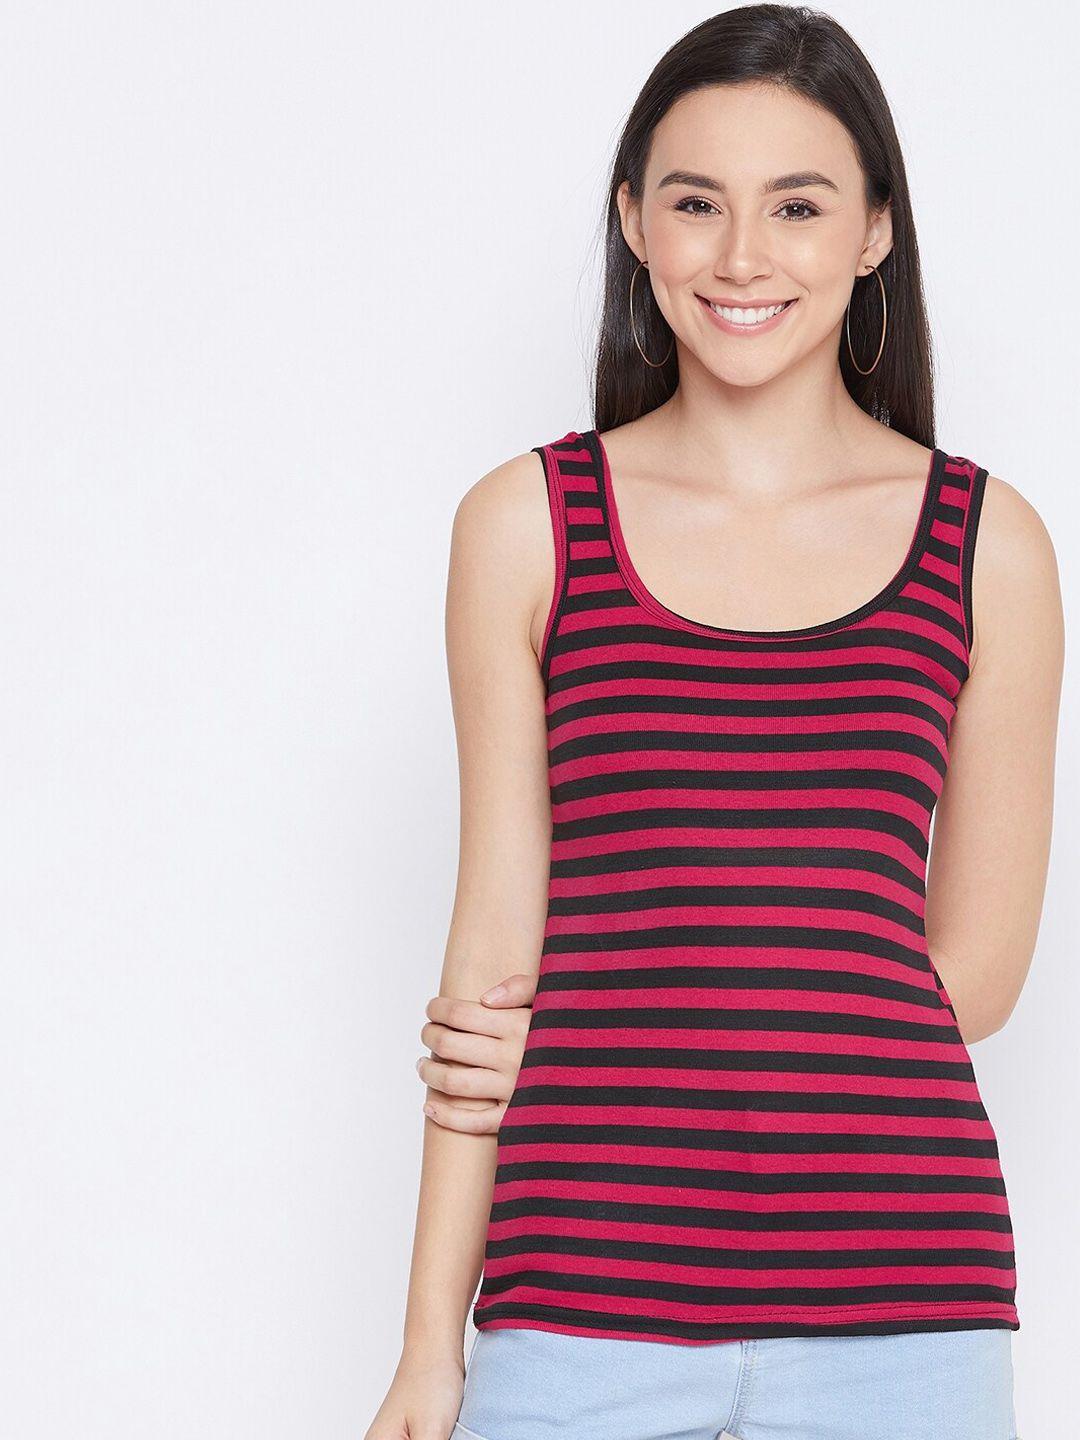 q-rious-women-red-&-black-striped--camisoles